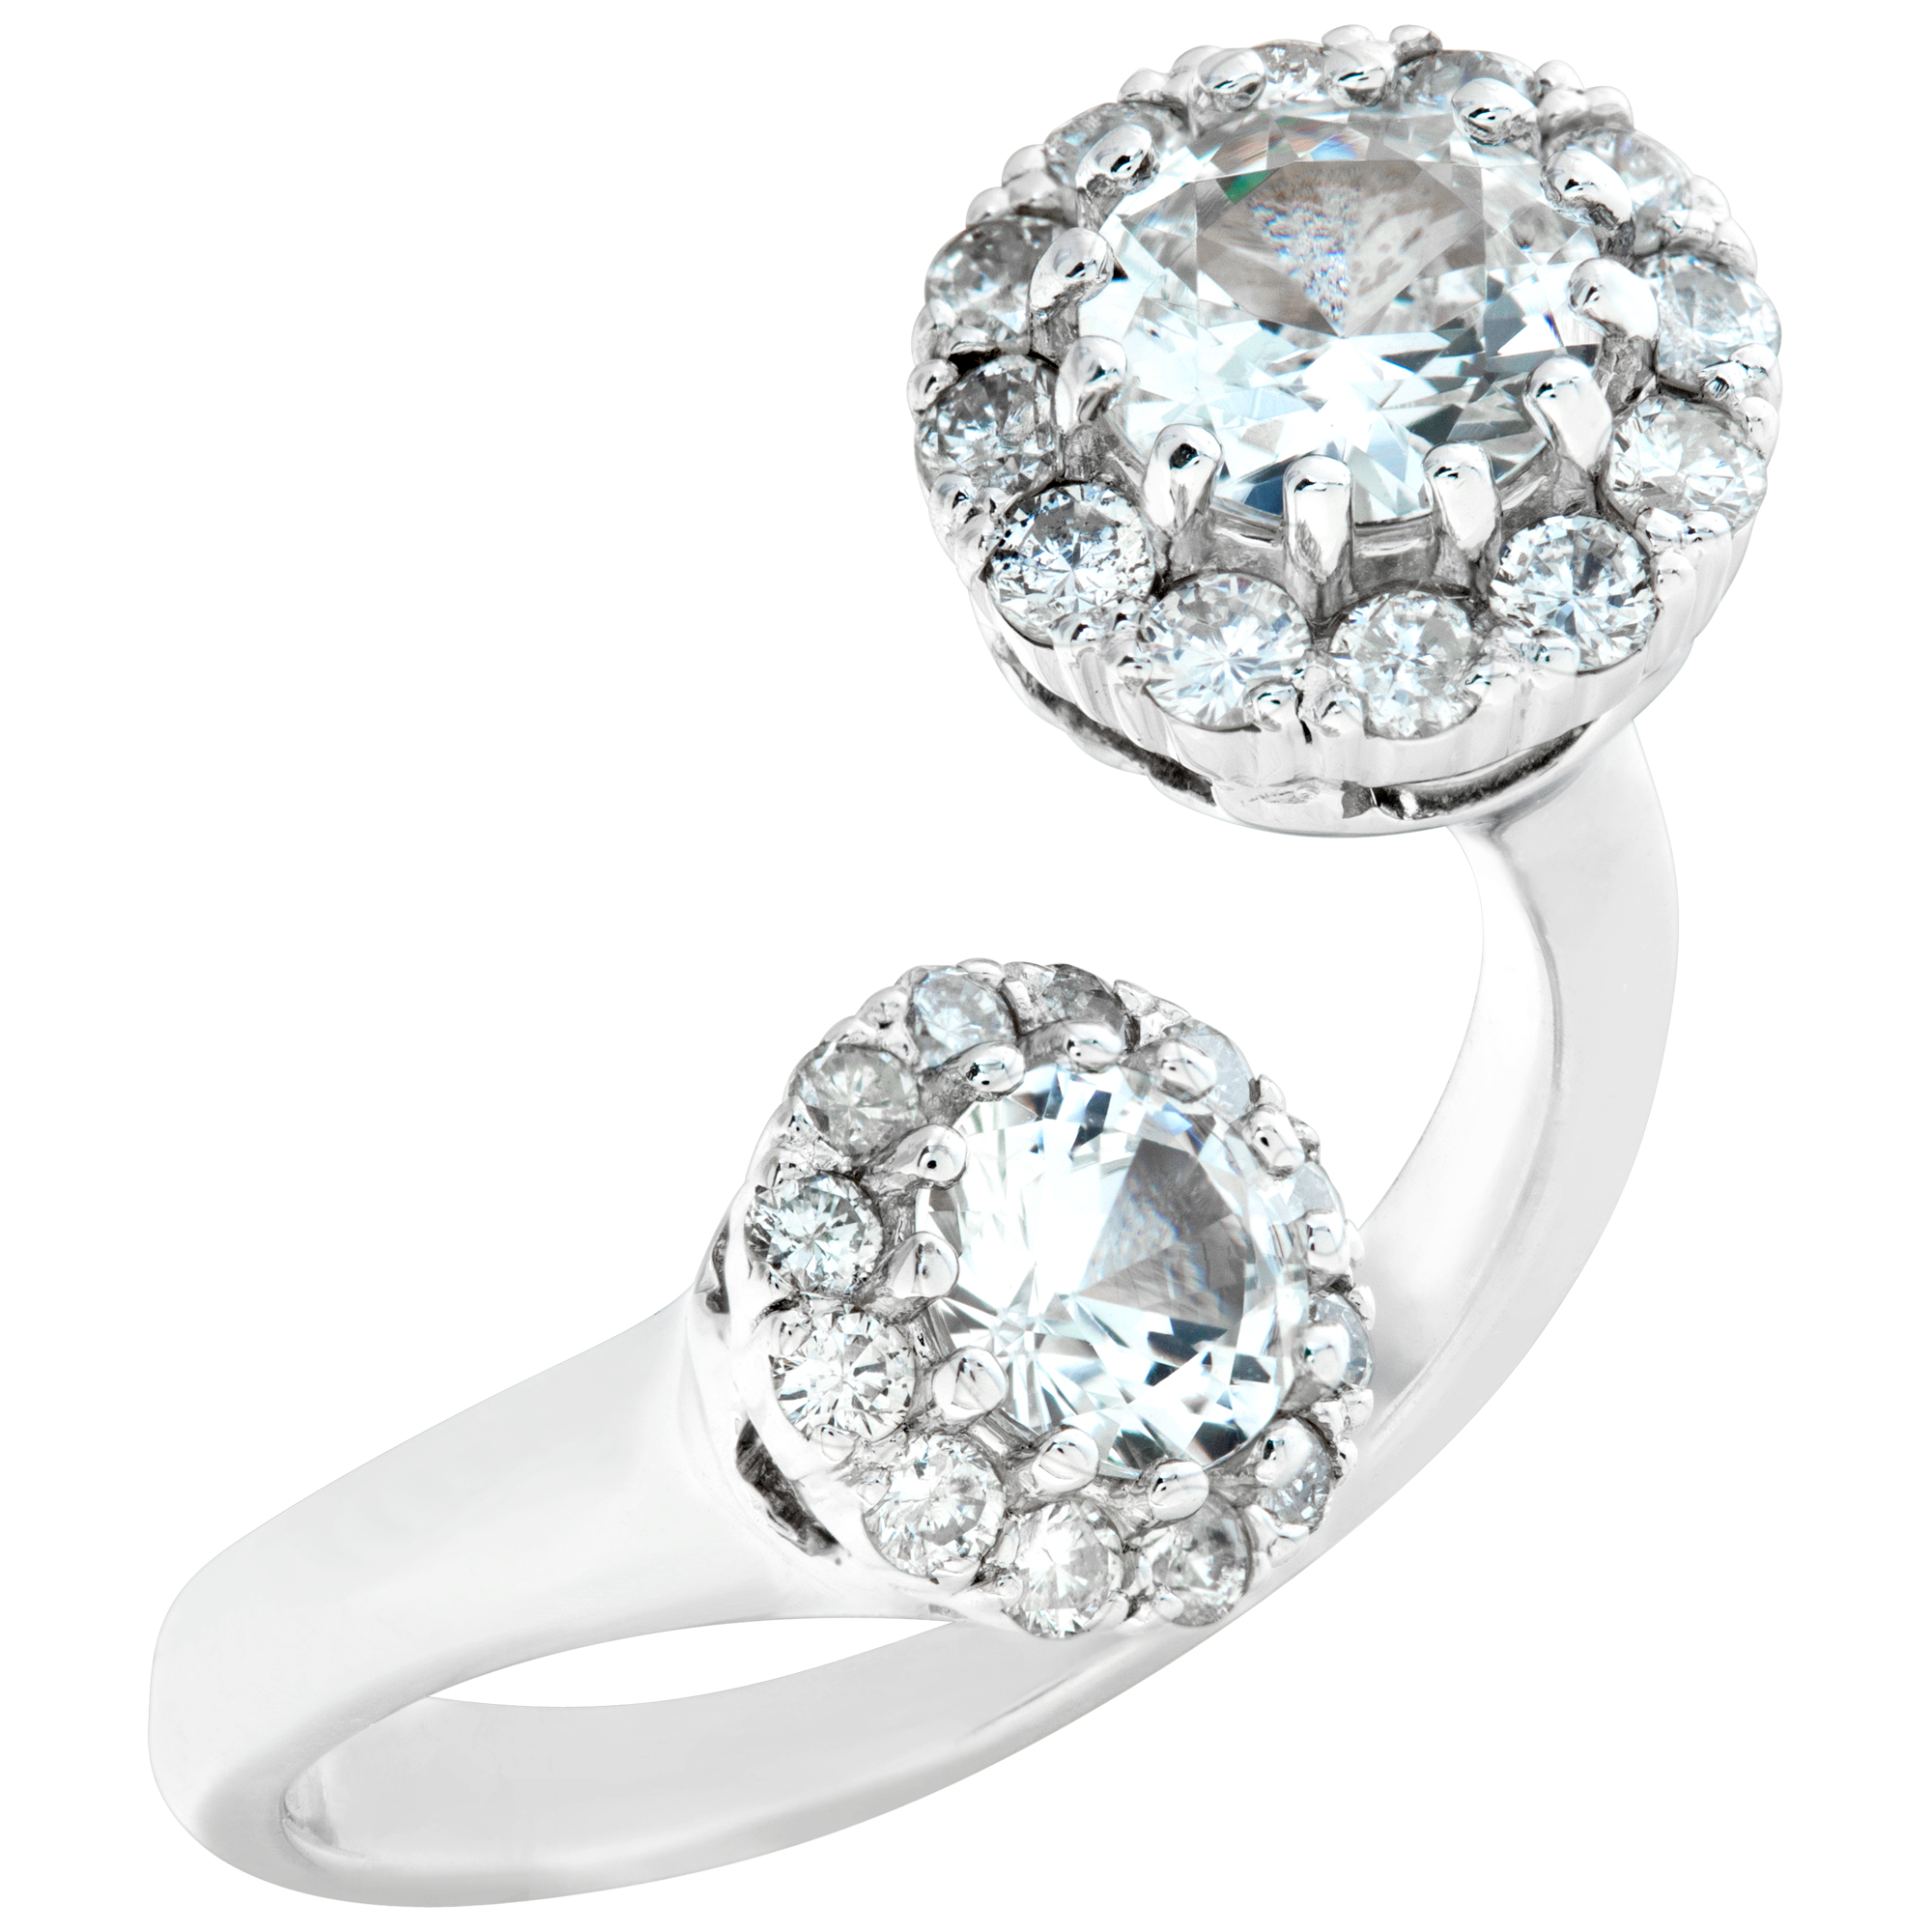 White Sapphires with Halo Diamonds set in 18k white gold. Size 5.25 image 3